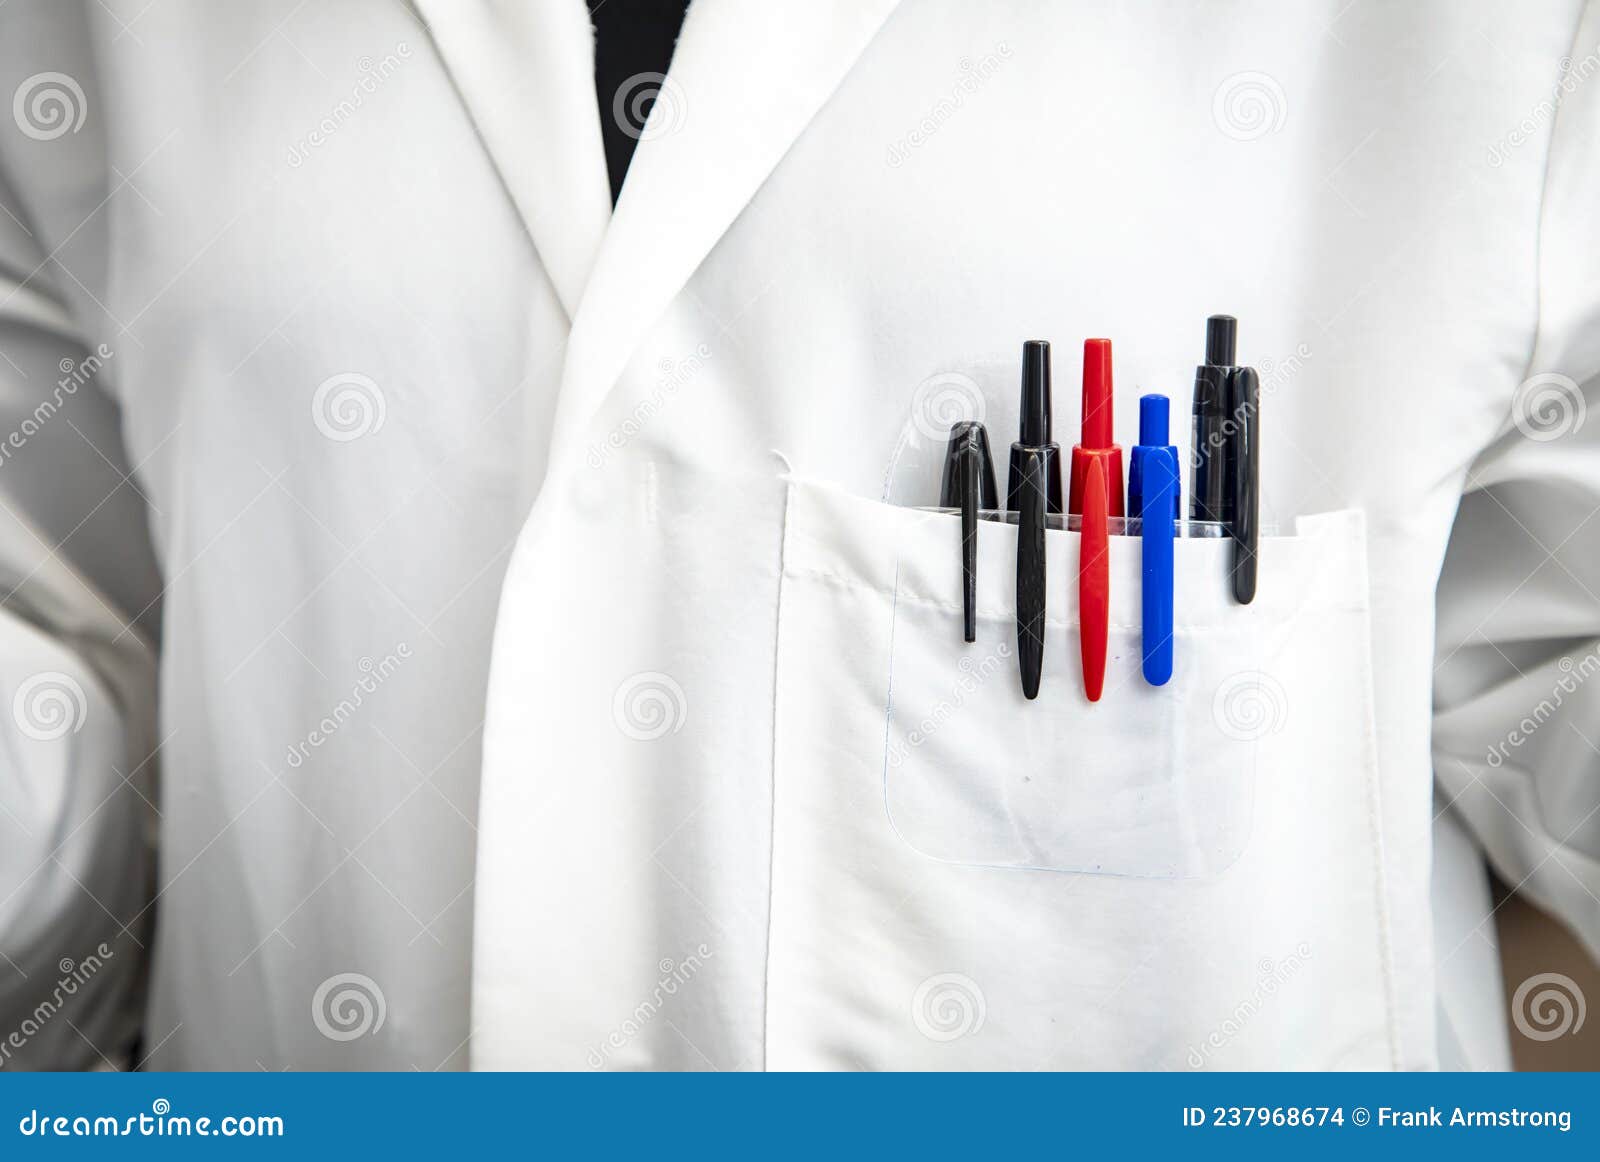 In a lab coat: choosing the best colored pens